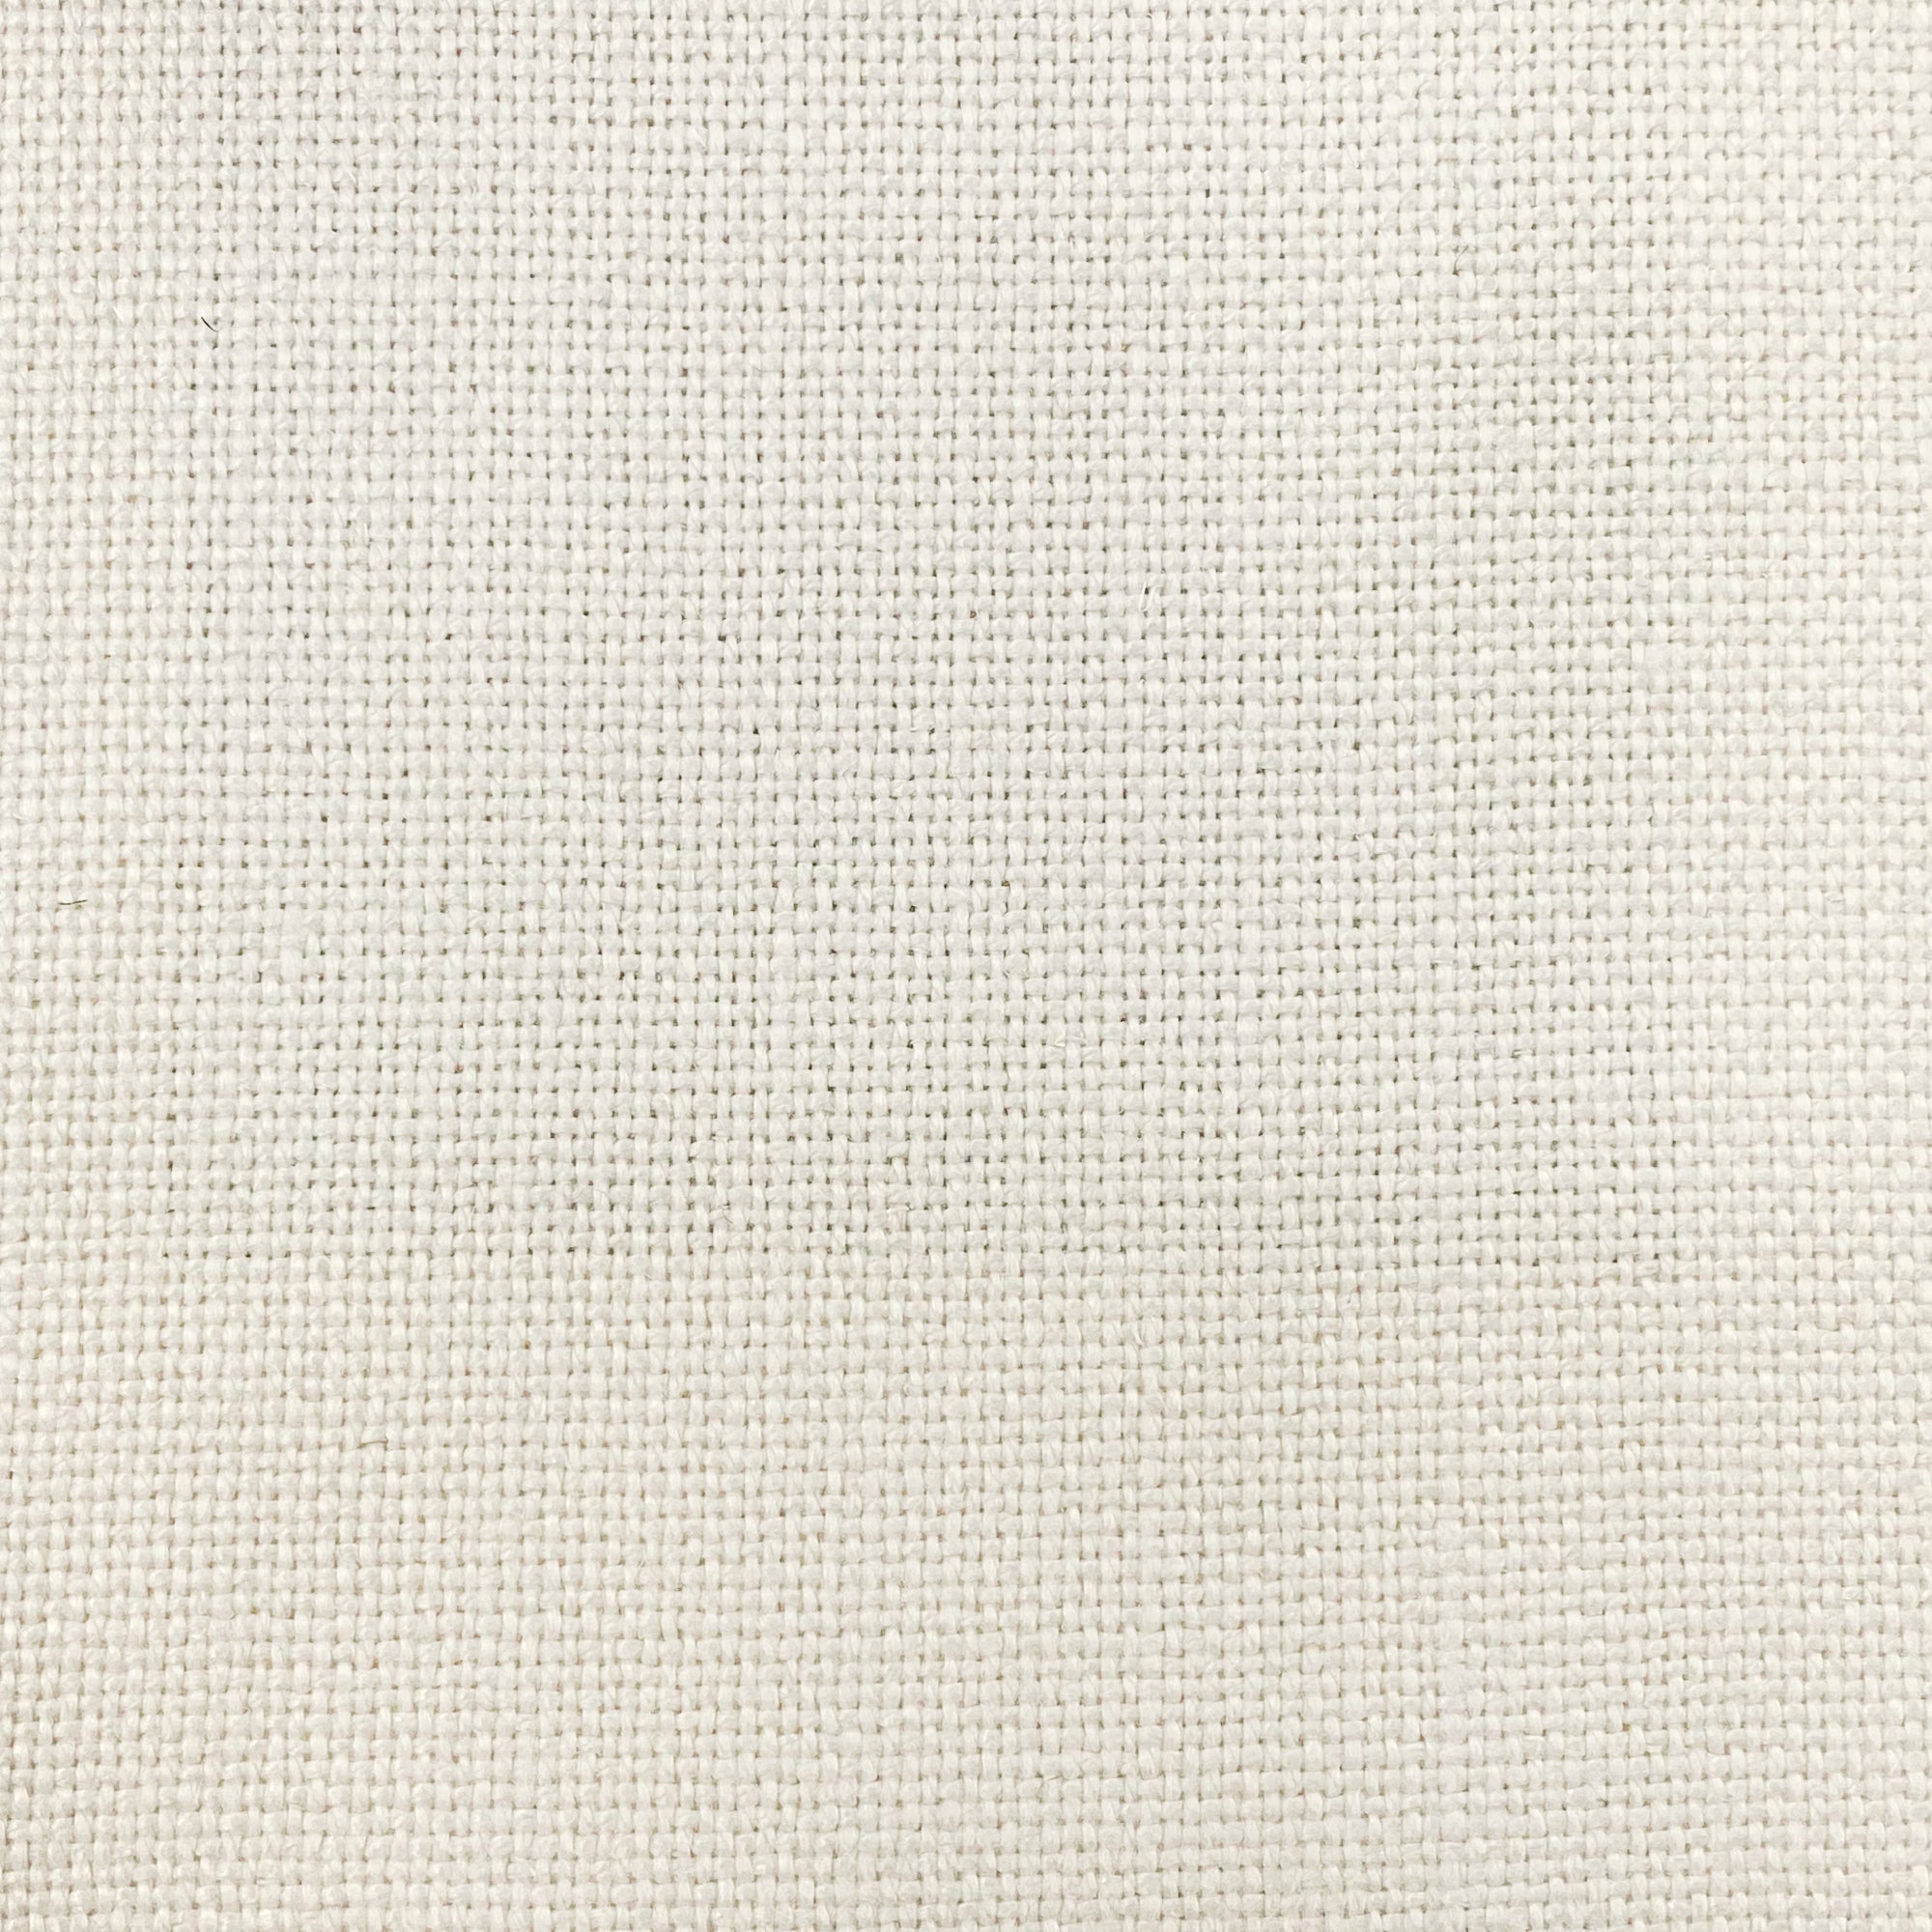 Bianche Fabric | Solid 100% Linen